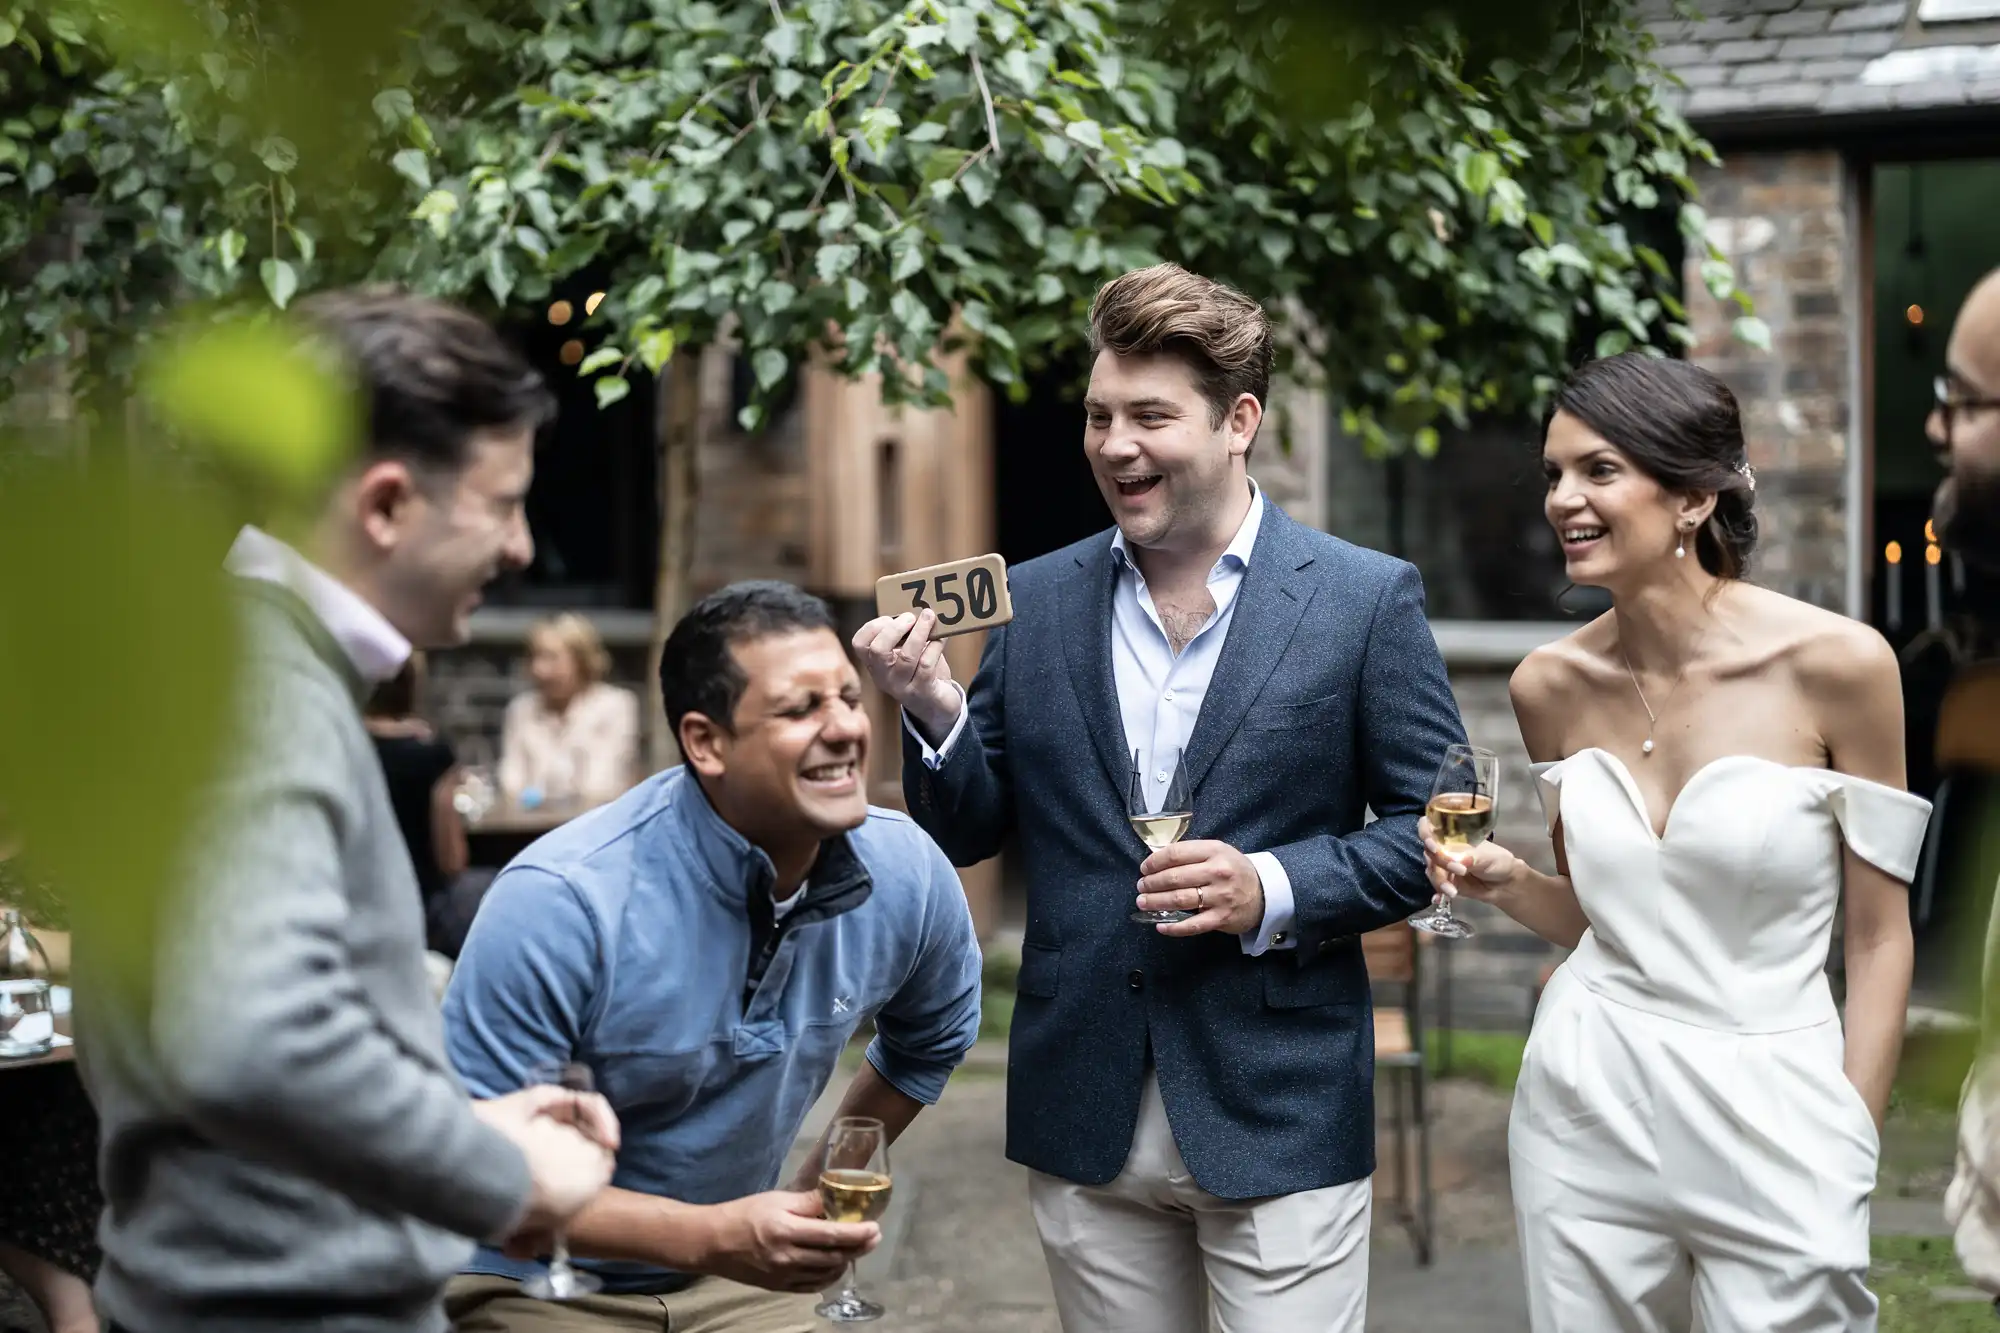 A group of people, including a bride and groom, enjoy a conversation and drinks at an outdoor wedding reception.